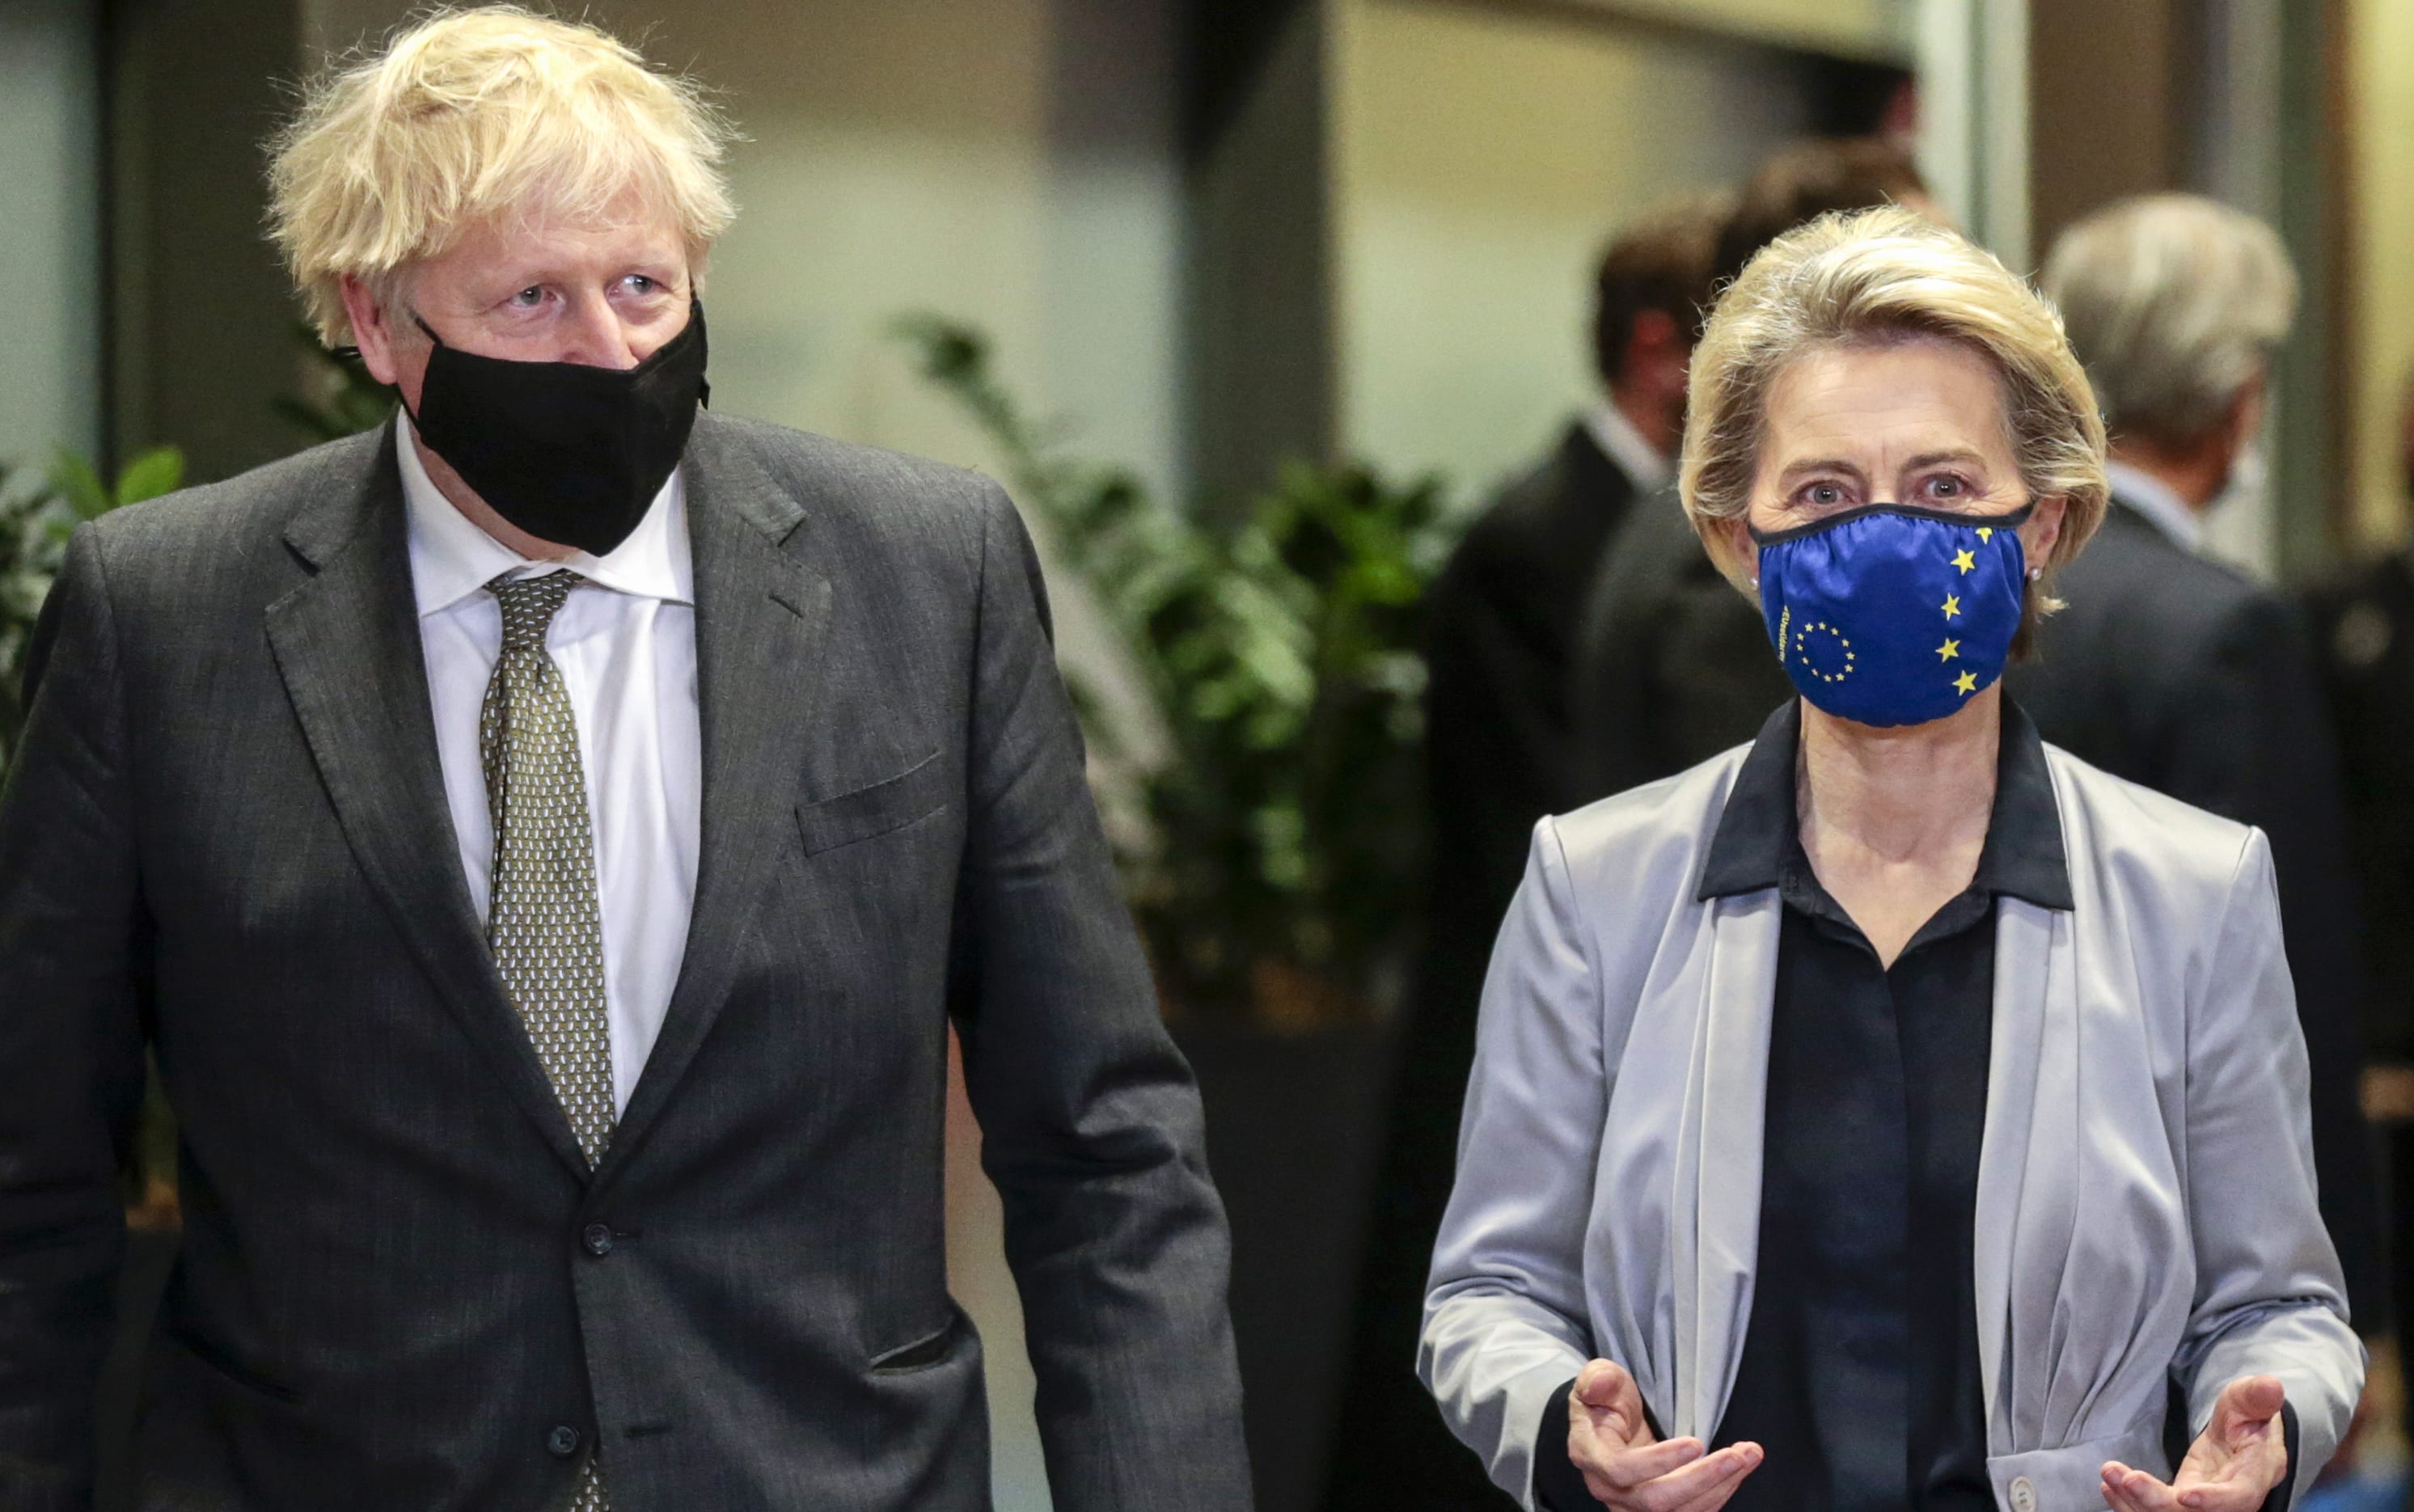 Britain's Prime Minister Boris Johnson is welcomed by European Commission President Ursula von der Leyen at the EU headquarters in Brussels.